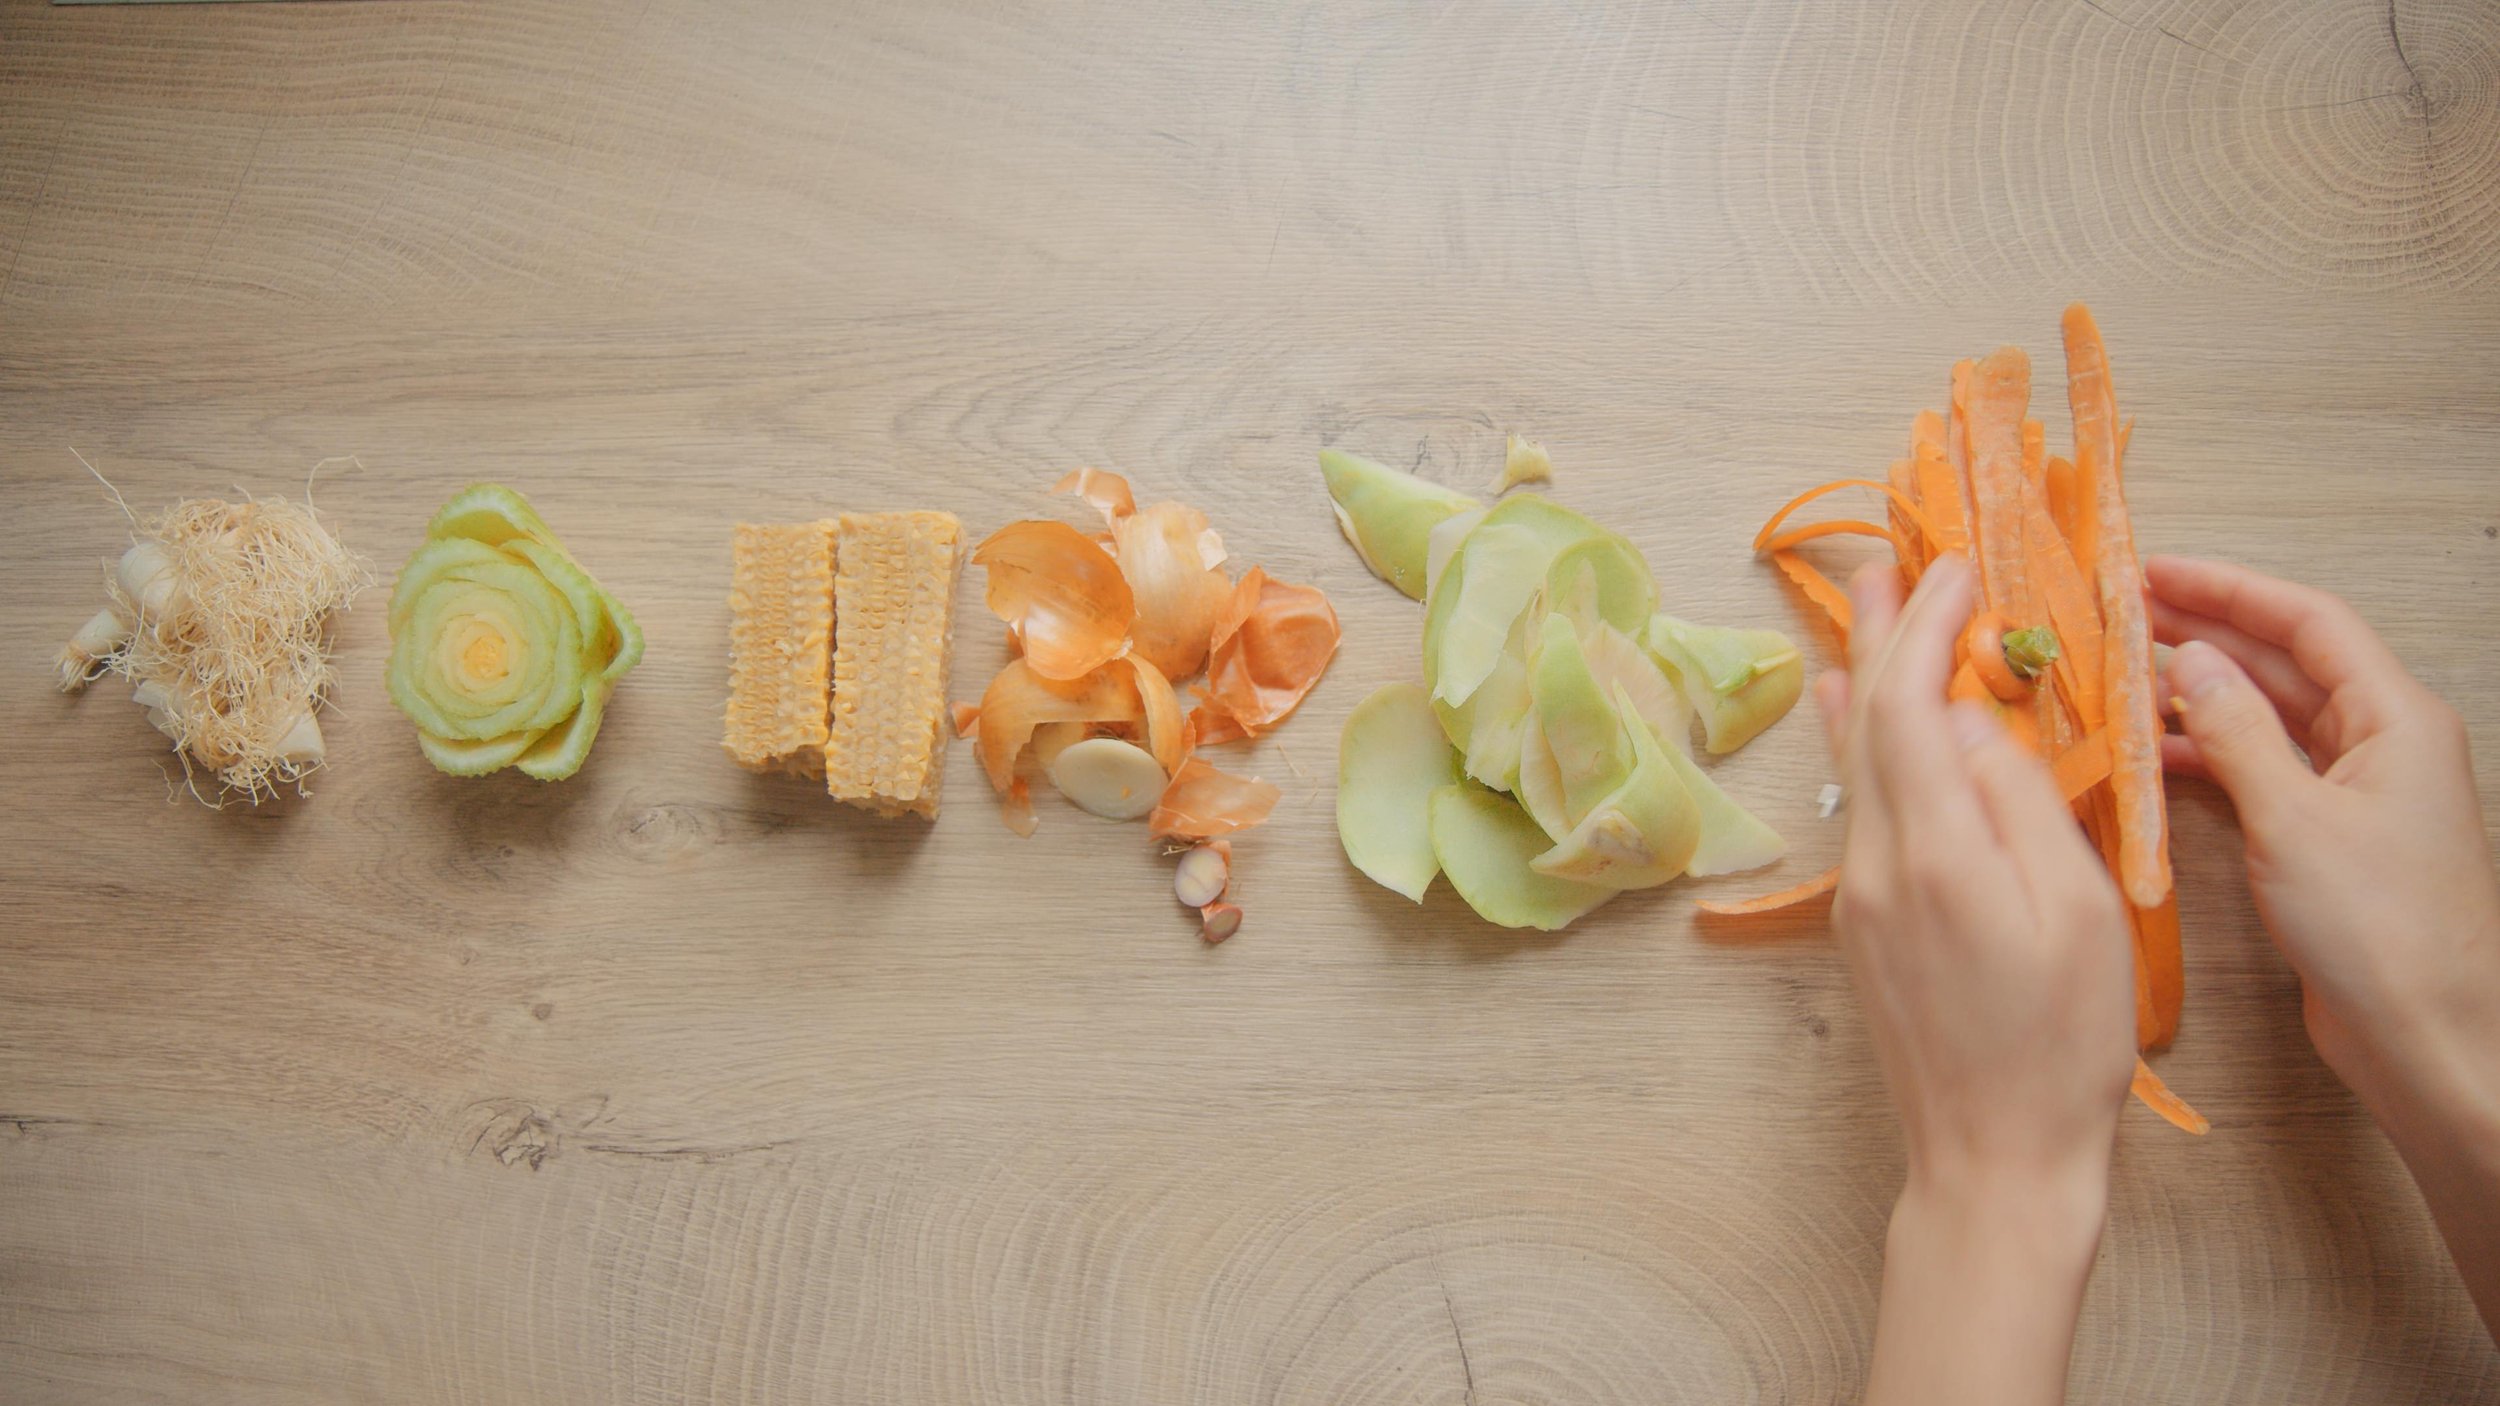 Creative Recipes With Food Scraps - Her86m2 _1.39.1.jpg